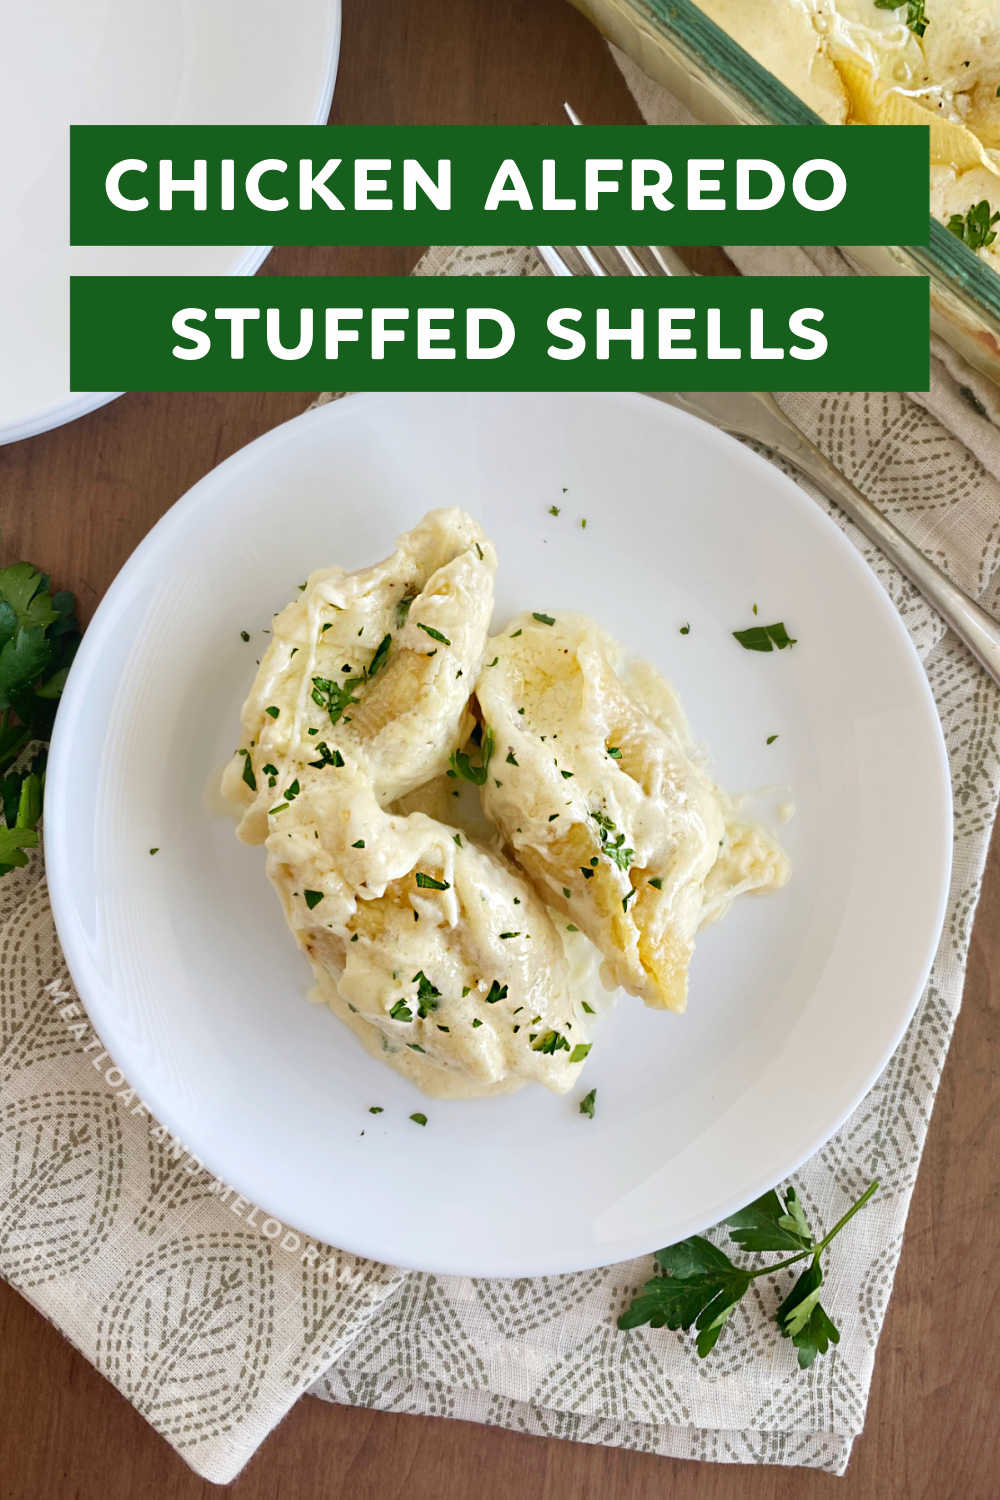 Chicken Alfredo Stuffed Shells is an easy dinner recipe you can make with rotisserie chicken, homemade Alfredo sauce and plenty of cheese. Your whole family will love this delicious stuffed shells recipe, and it works great with leftover turkey, too! via @meamel